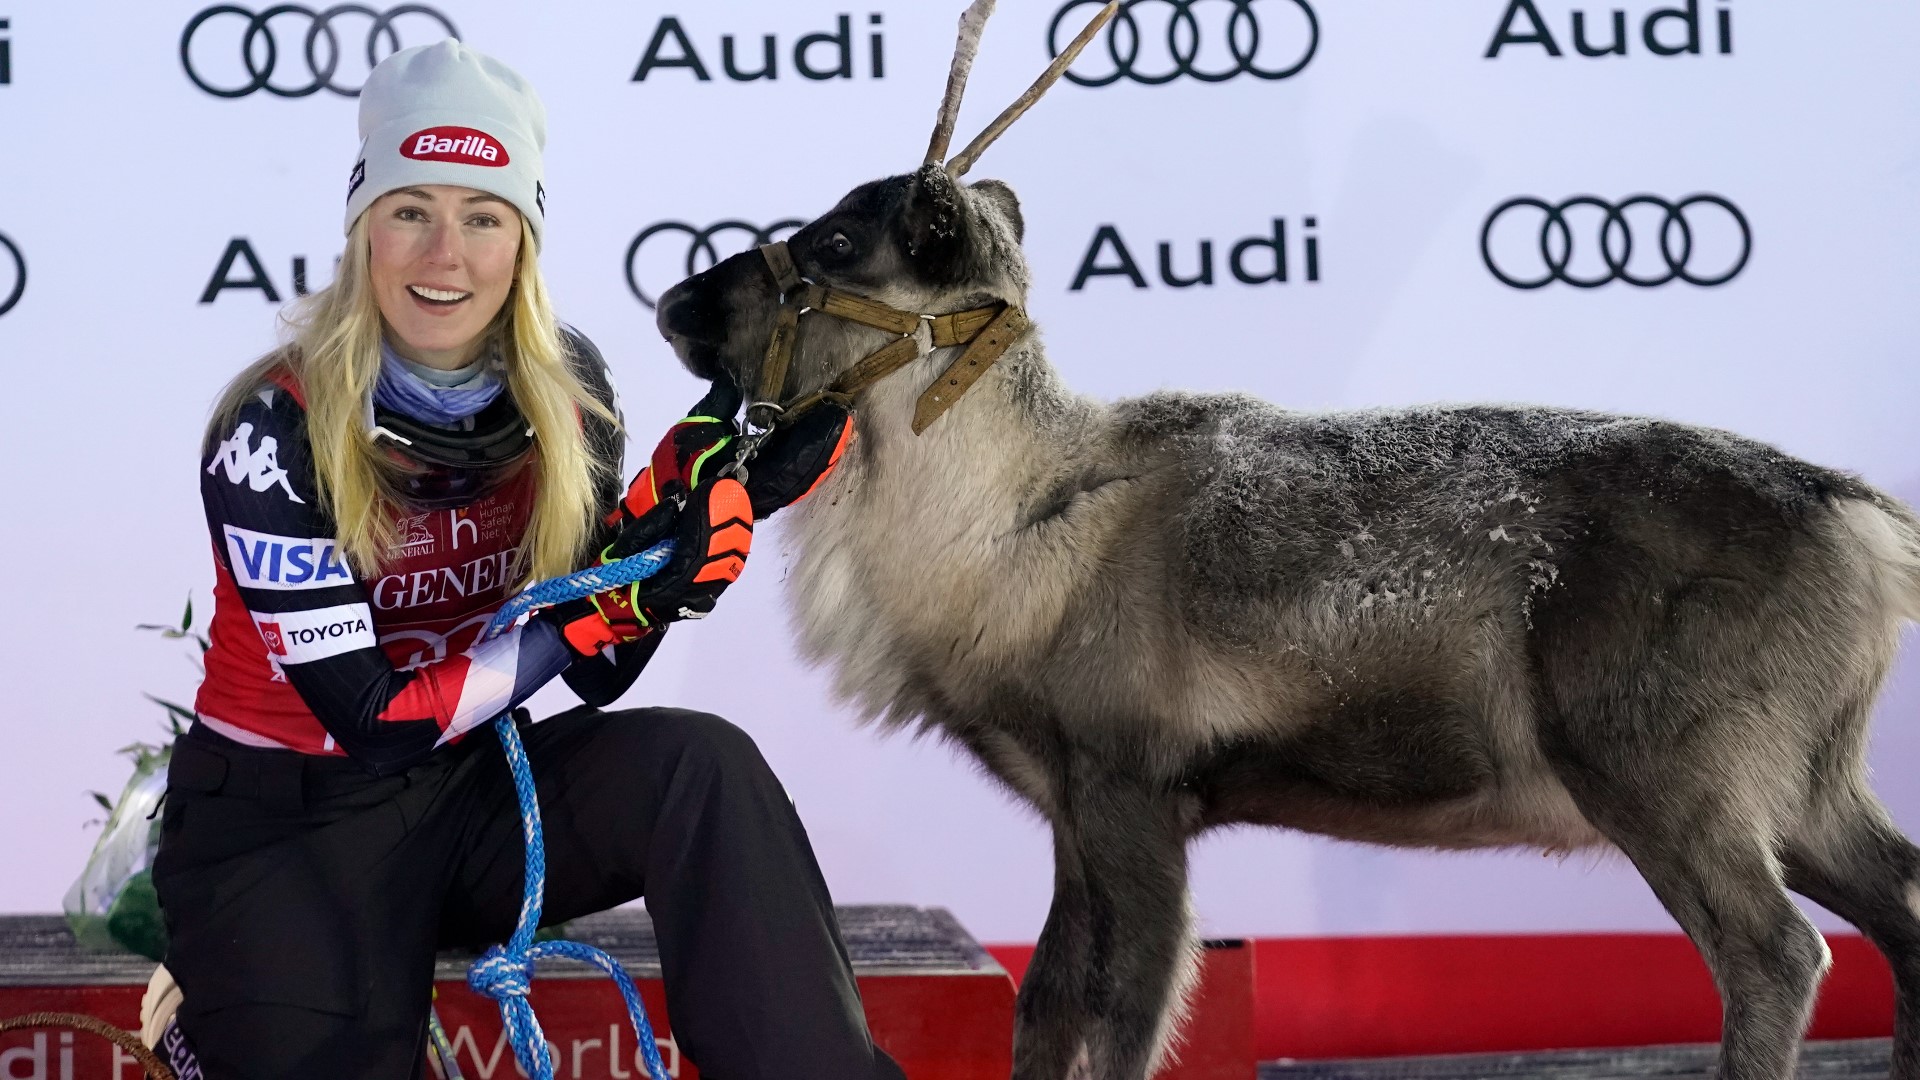 The victory earned the American a seventh reindeer — a traditional prize the winner receives after the race in Finnish Lapland.